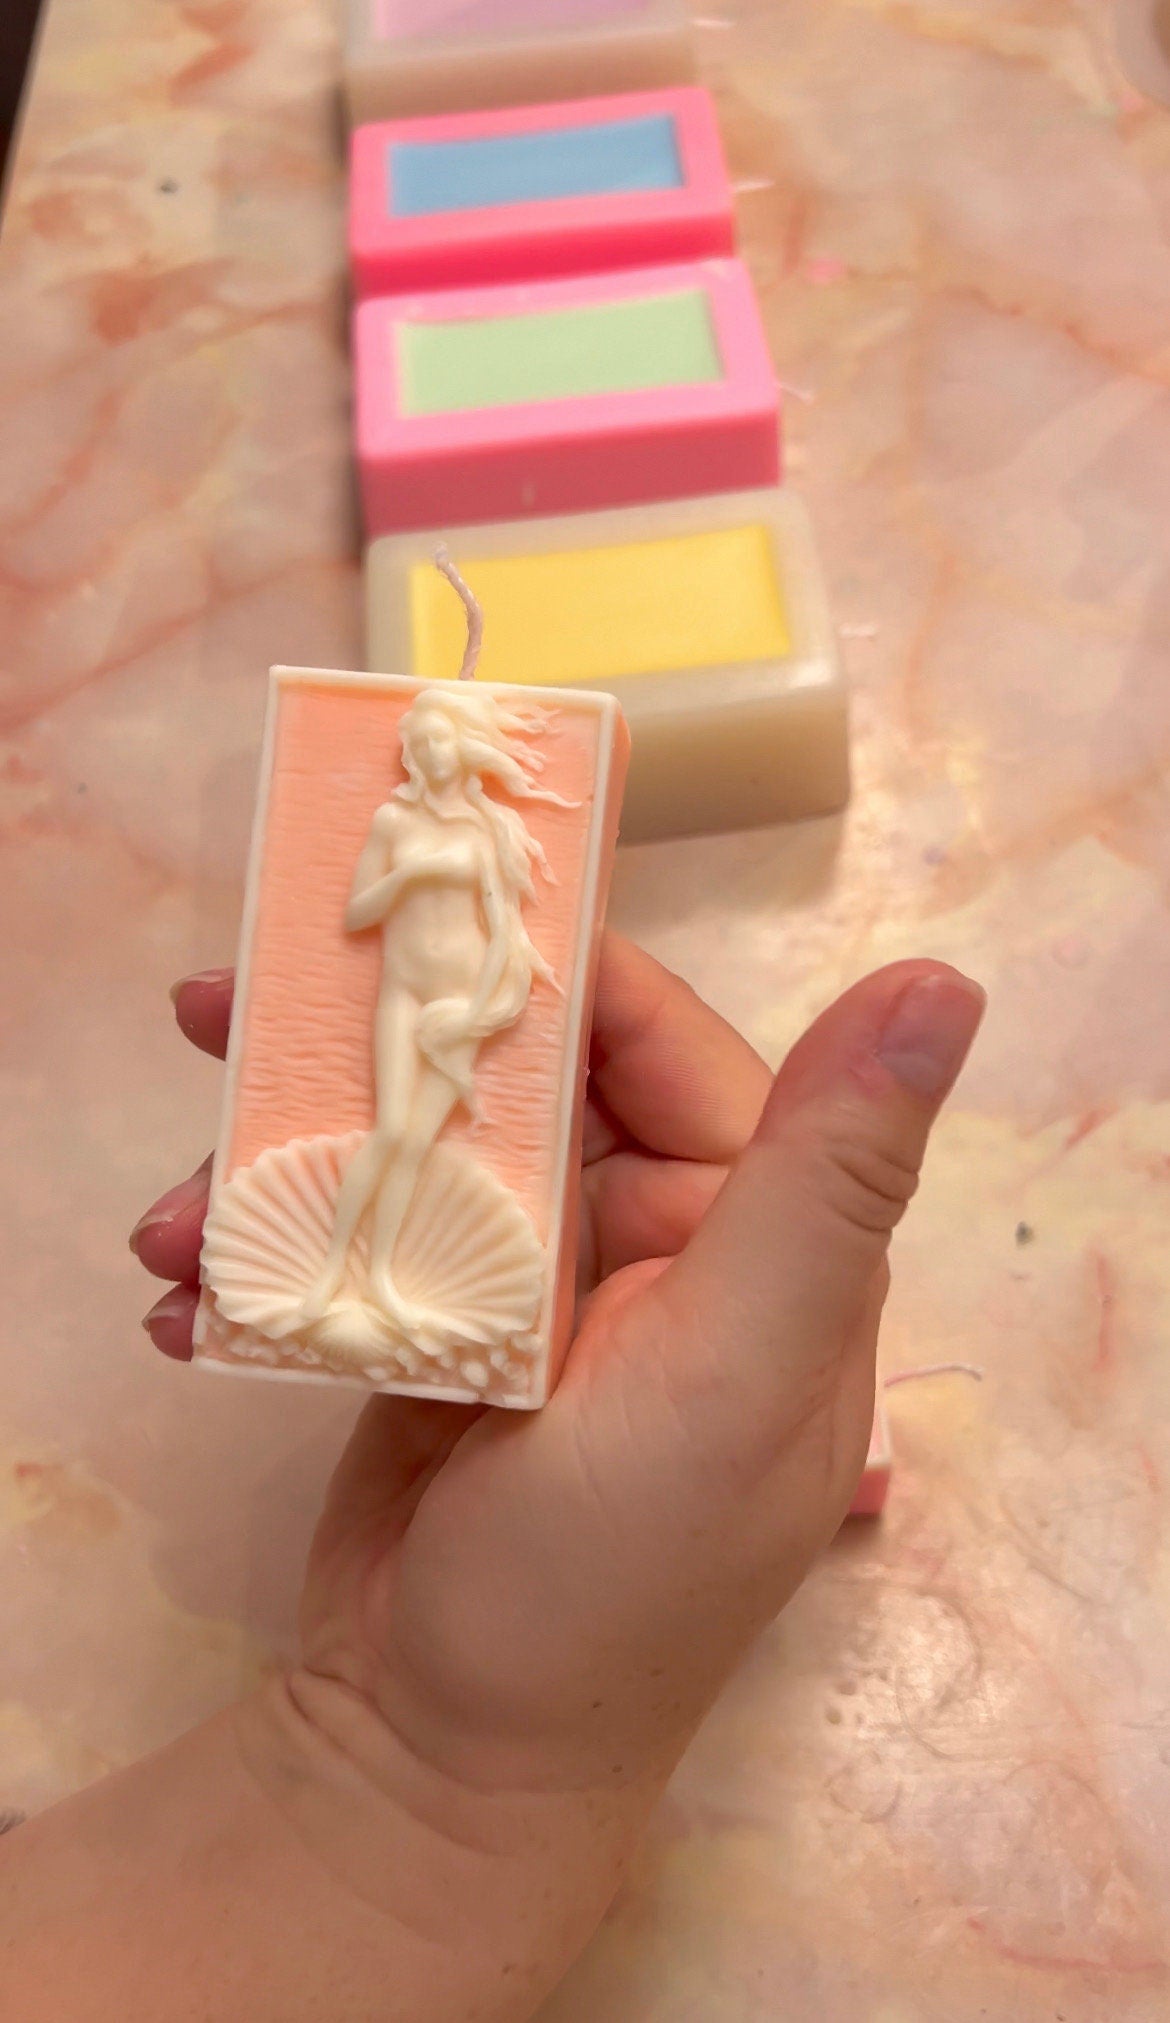 The Birth of Venus - Roman Goddess Two Toned Wedgwood Style Aesthetic Candle